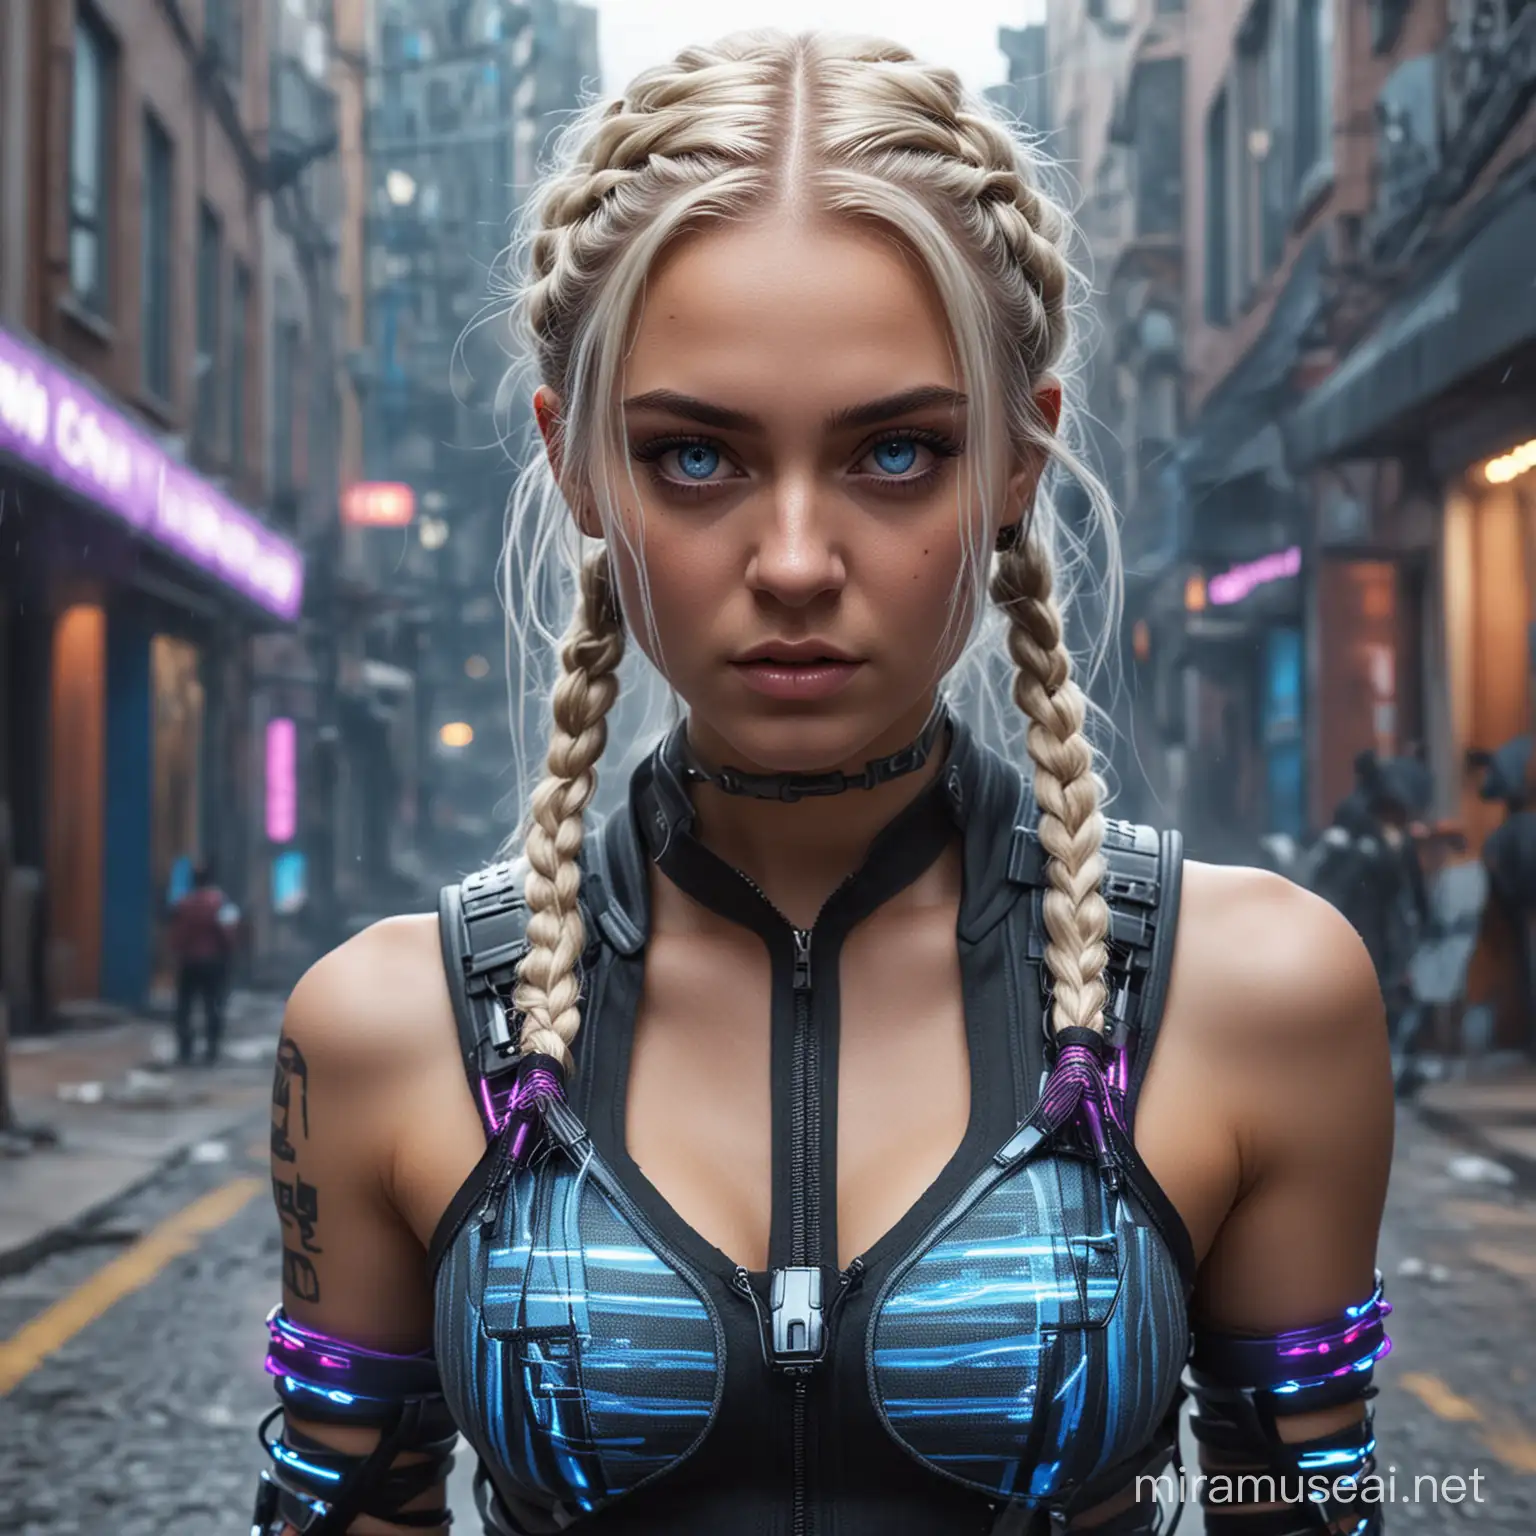 realistic young adult girl with blonde and purple striped hair in braids, glowing blue eyes, menacing look, electrodes running along her face, futuristic clothing, full body, sci fi street background